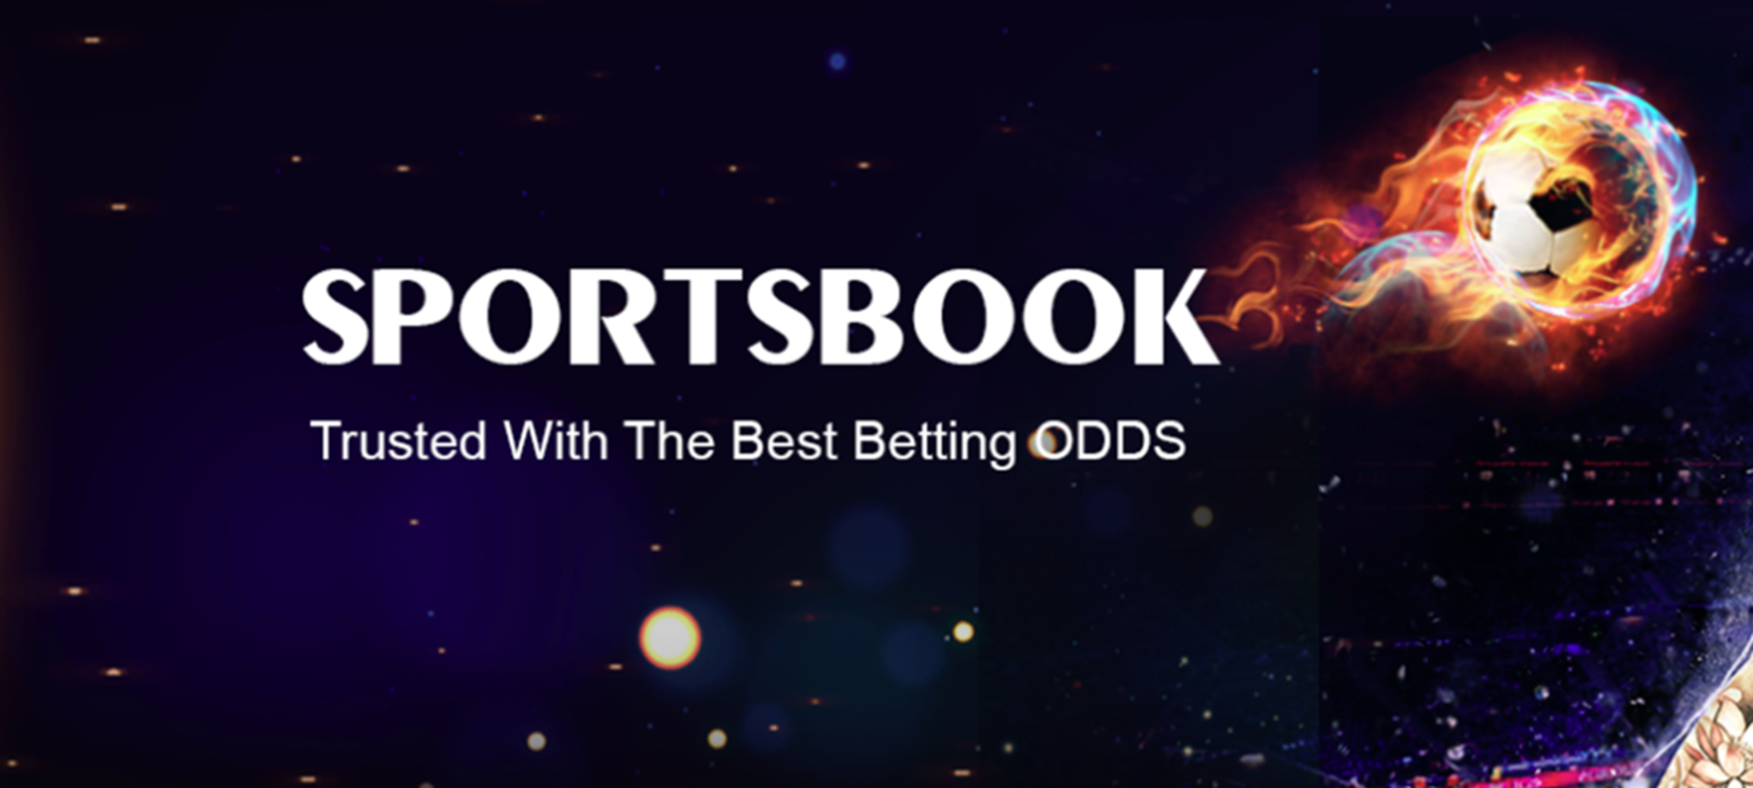 The Most Popular Sports to Bet On Online and Their Odds